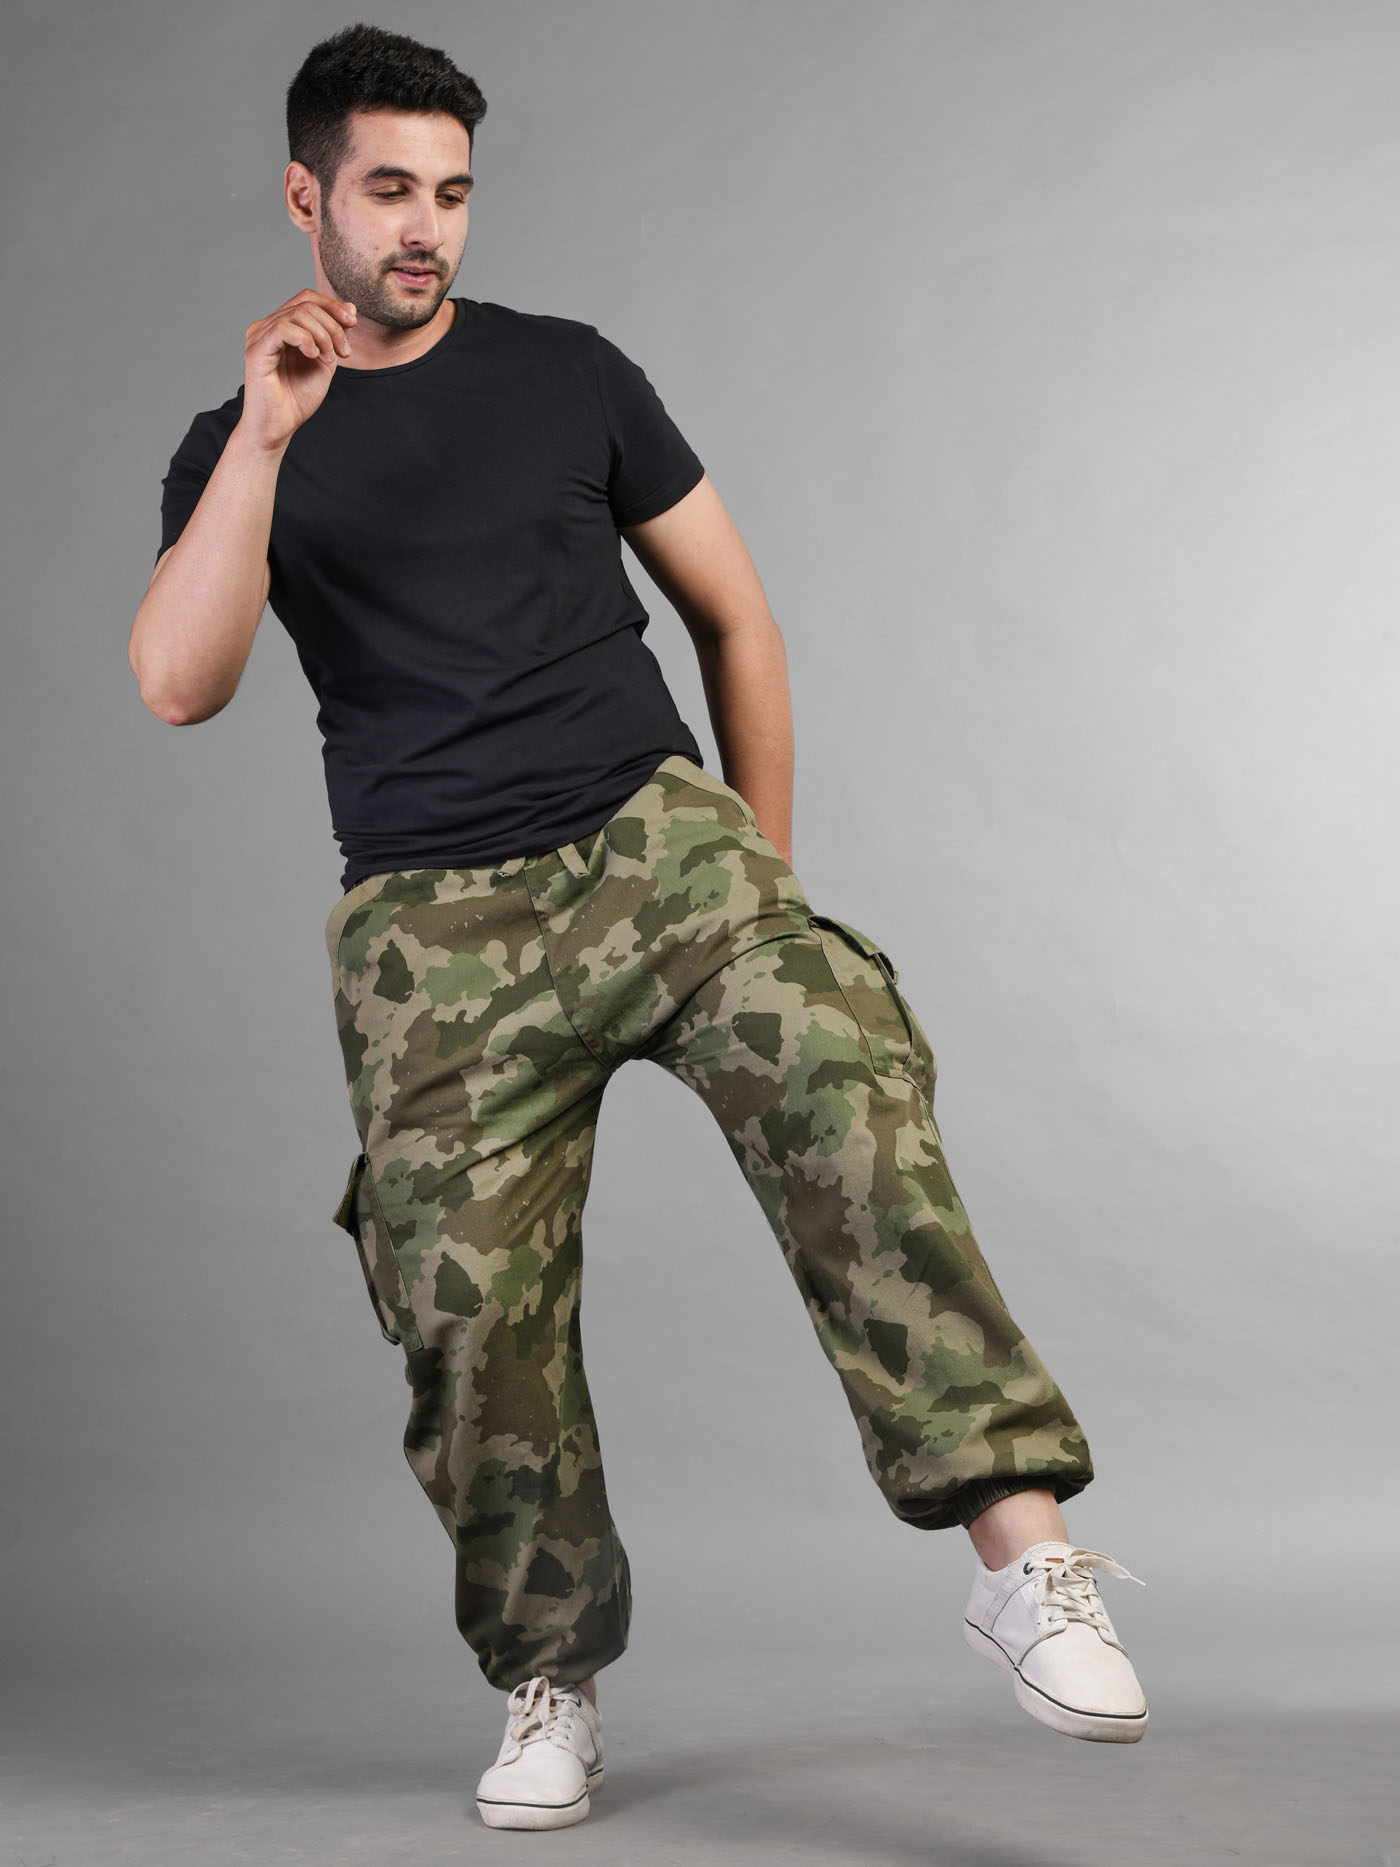 Men's Camouflage Cargo Pants Baggy Casual Elastic Waist Military Army Camo  Pants with Multi Pockets Comfy Lace-Up Pants(XXXL,Black) - Walmart.com